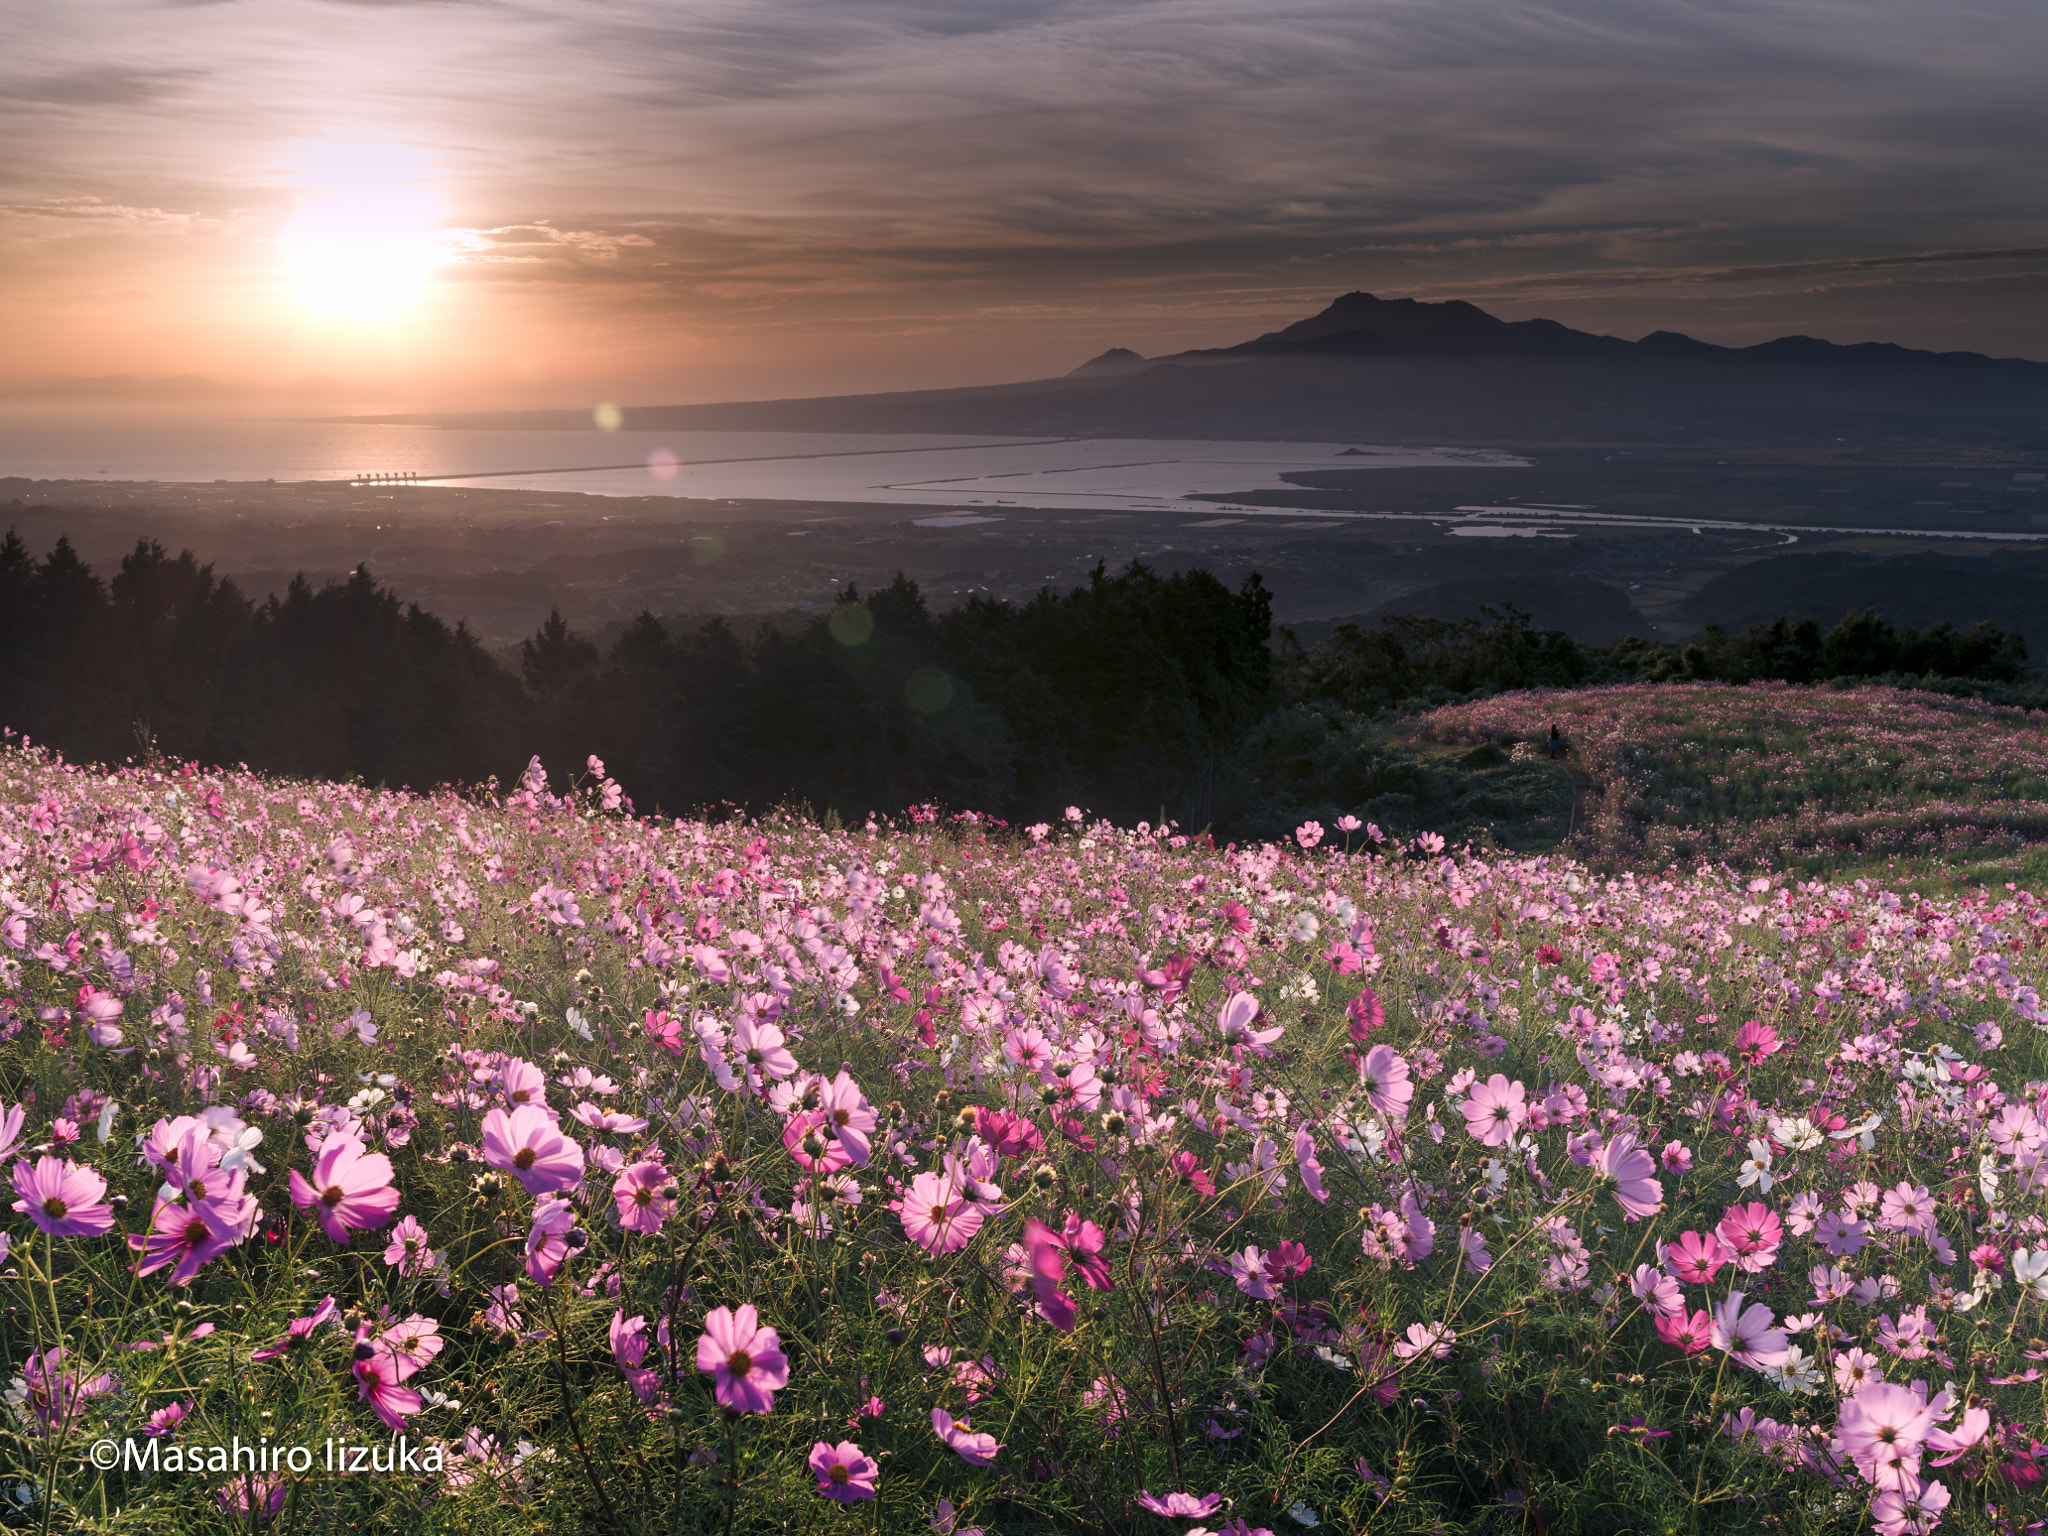 Pentax 645Z sample photo. The cosmos fields at sunrise photography